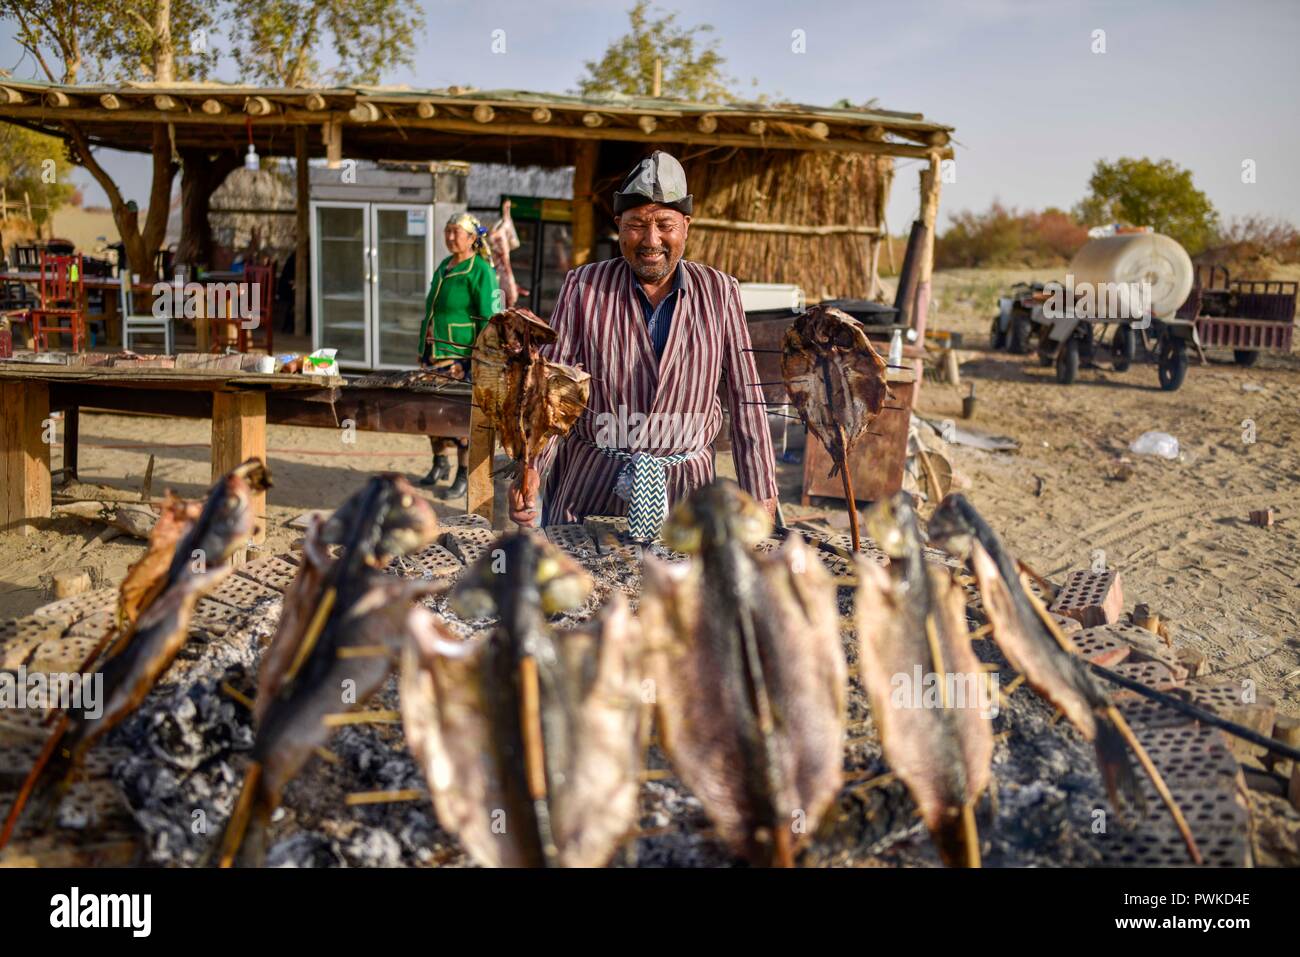 (181017) -- YULI, Oct. 17, 2018 (Xinhua) -- A resident makes roast fish at the Lop Nur People Village of Yuli County, northwest China's Xinjiang Uygur Autonomous Region, Oct. 16, 2018. The Lop Nur people depended basically on fishing for livelihood and developed a distinct culture based on their special lifestyle. Located in Tarim basin, Yuli is known for its natural scenery and ethnic culture and keeps attracting numerous tourists from at home and abroad. From Oct. 1 to 16, 2018, Yuli County has received more than 230,000 visitors, with a year-on-year increase of 31.46 percent. (Xinhua/Zhao G Stock Photo